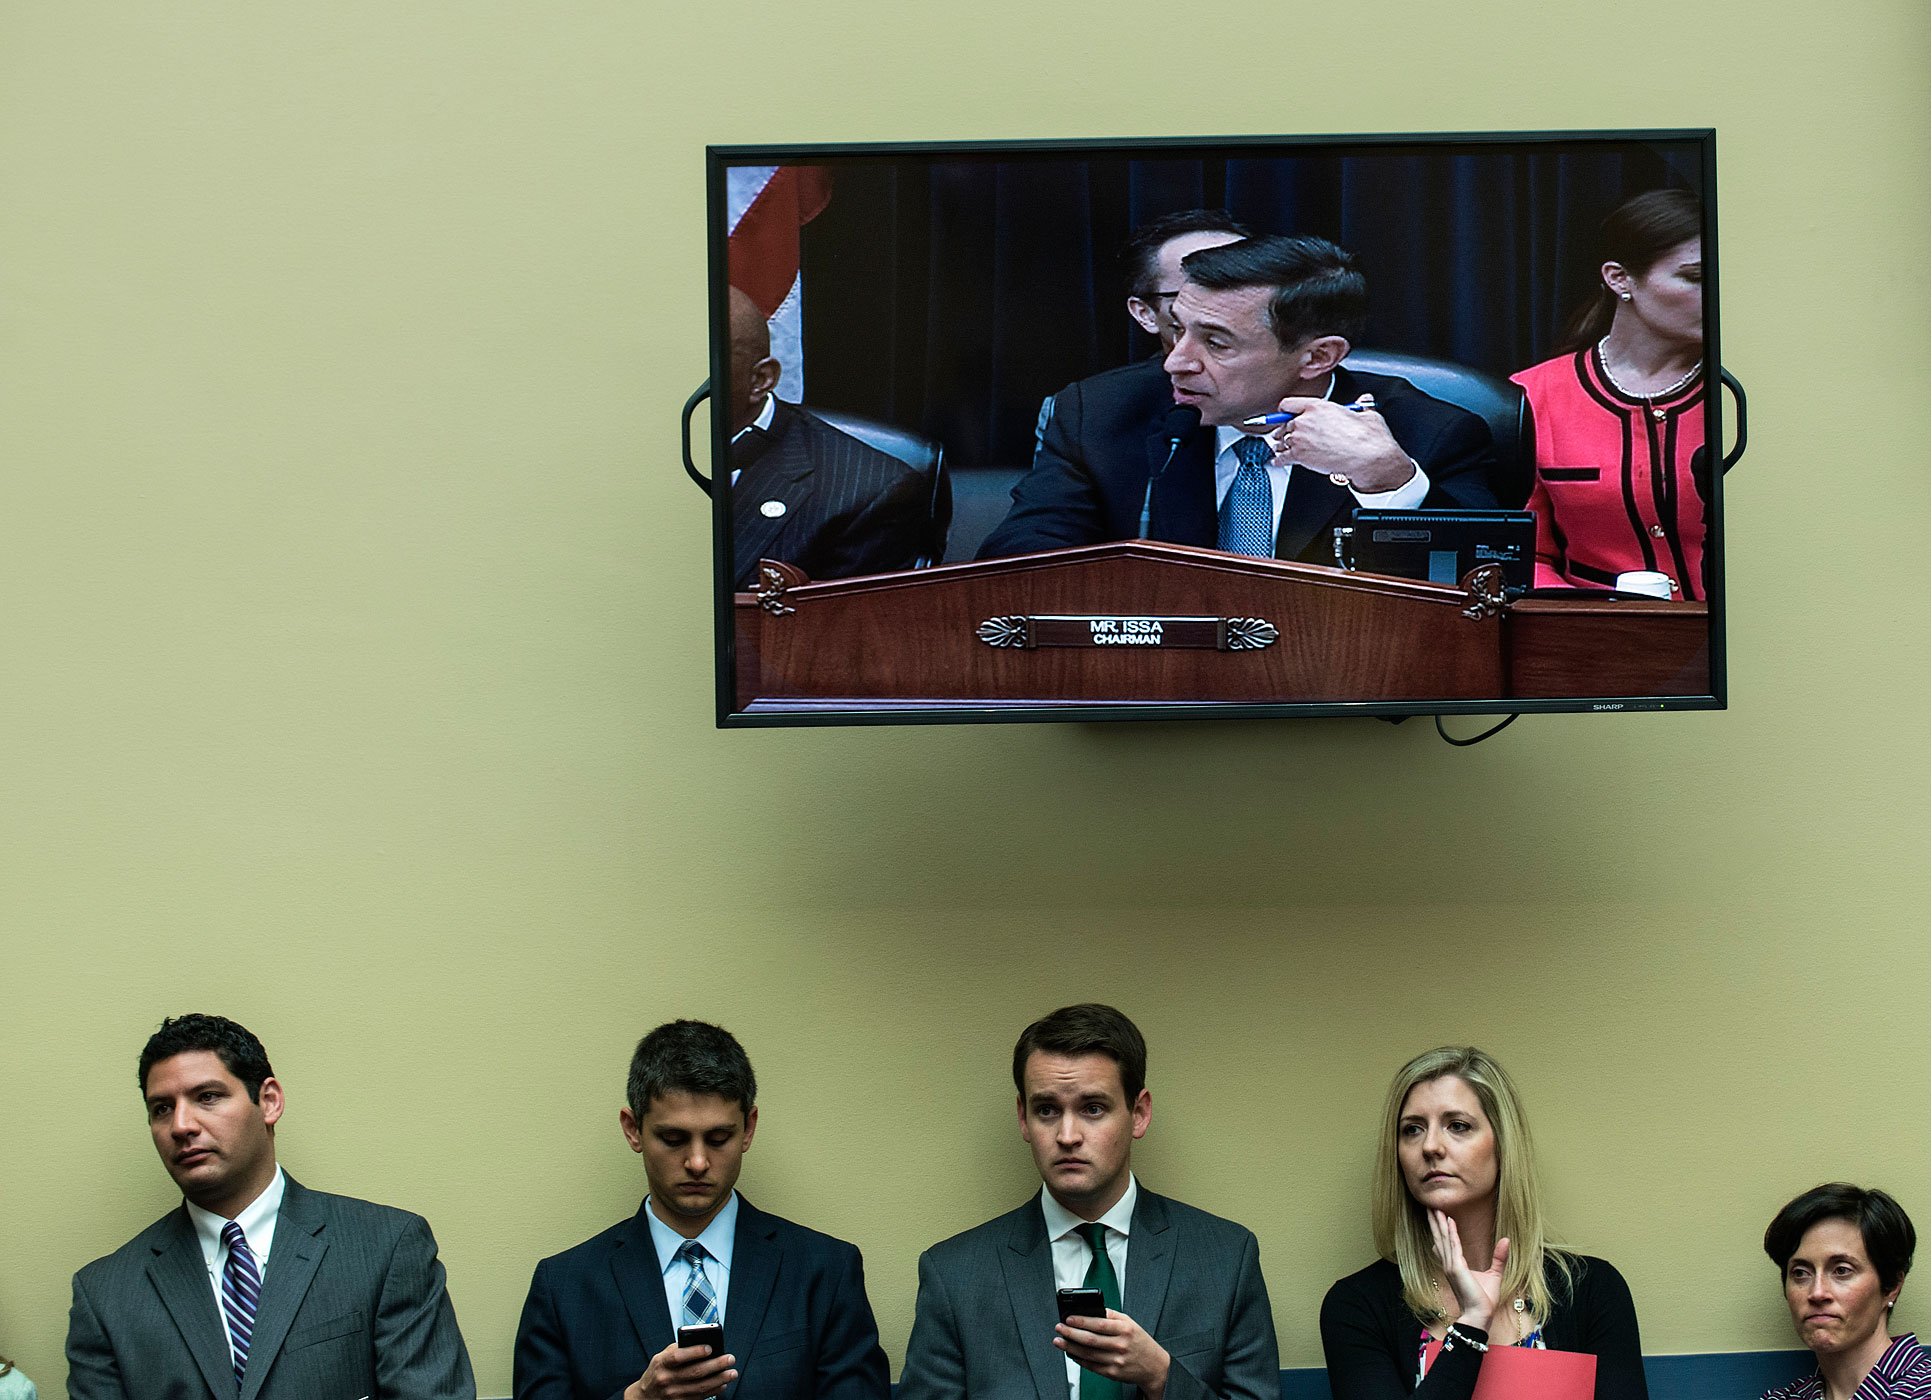 May 8, 2013. Committee Chairman Rep. Darrell Issa is seen on a screen speaking during a hearing of the House Committee On Oversight and Government Reform on Capitol Hill in Washington. The hearing investigated the events and response to a 2012 attack on one of the United States's diplomatic compounds in Benghazi, Libya.